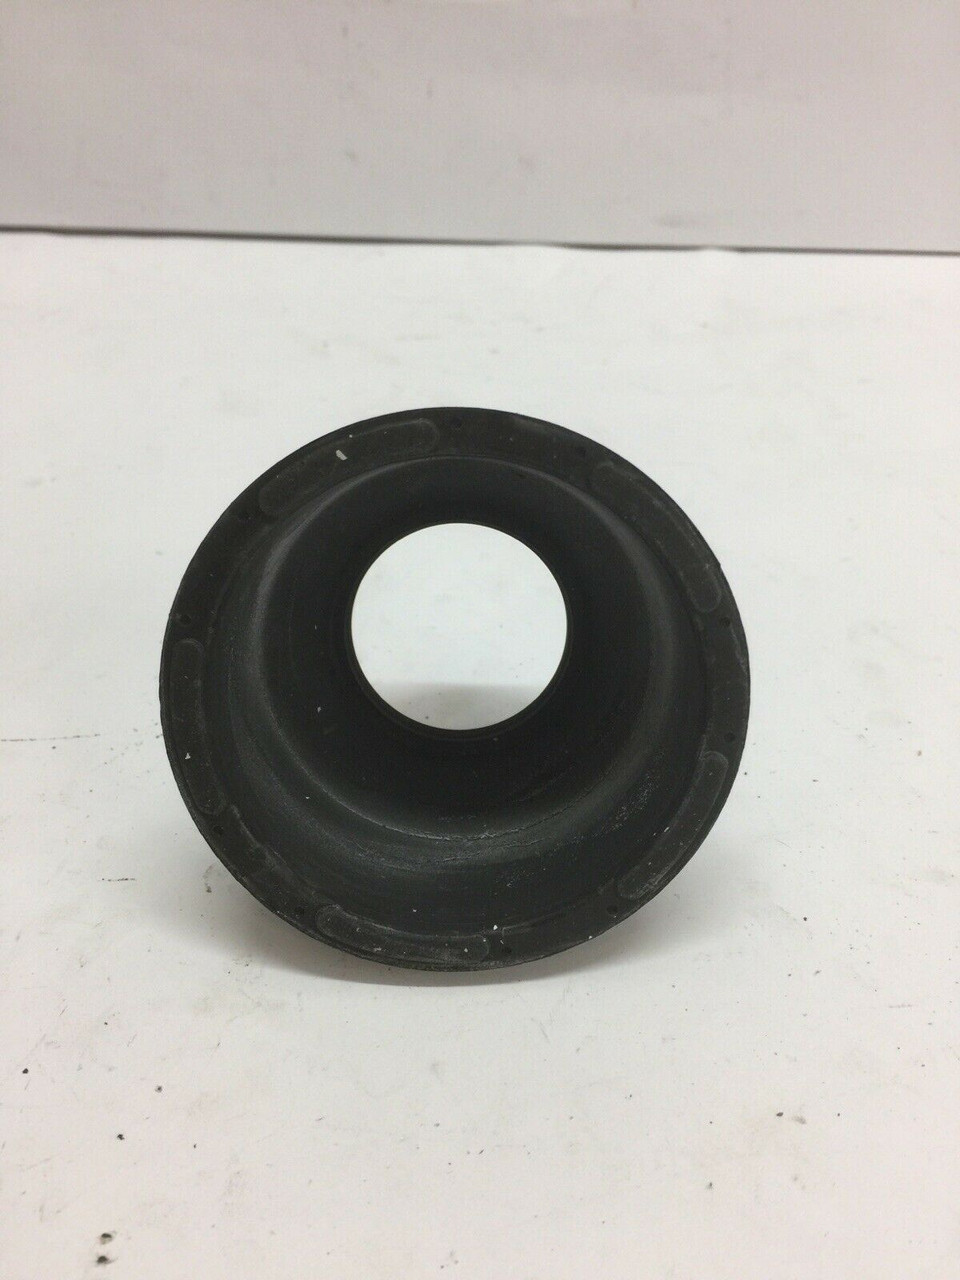 CAT Power Transmission Component Boot Seal 199-7819 Caterpillar